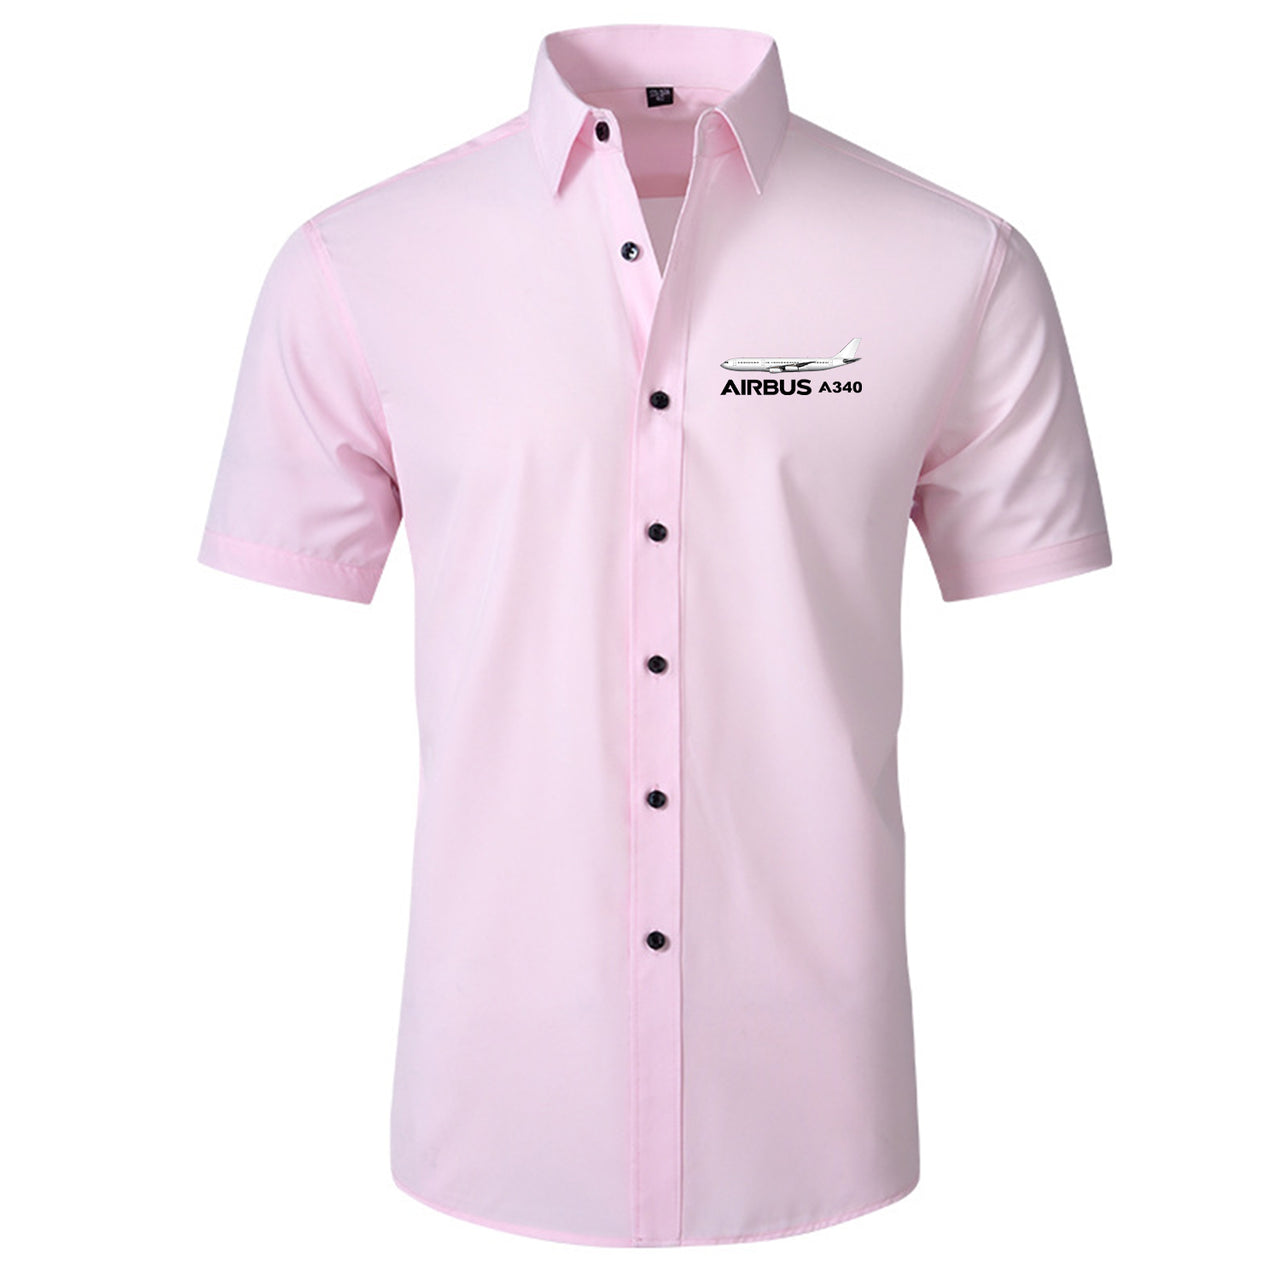 The Airbus A340 Designed Short Sleeve Shirts